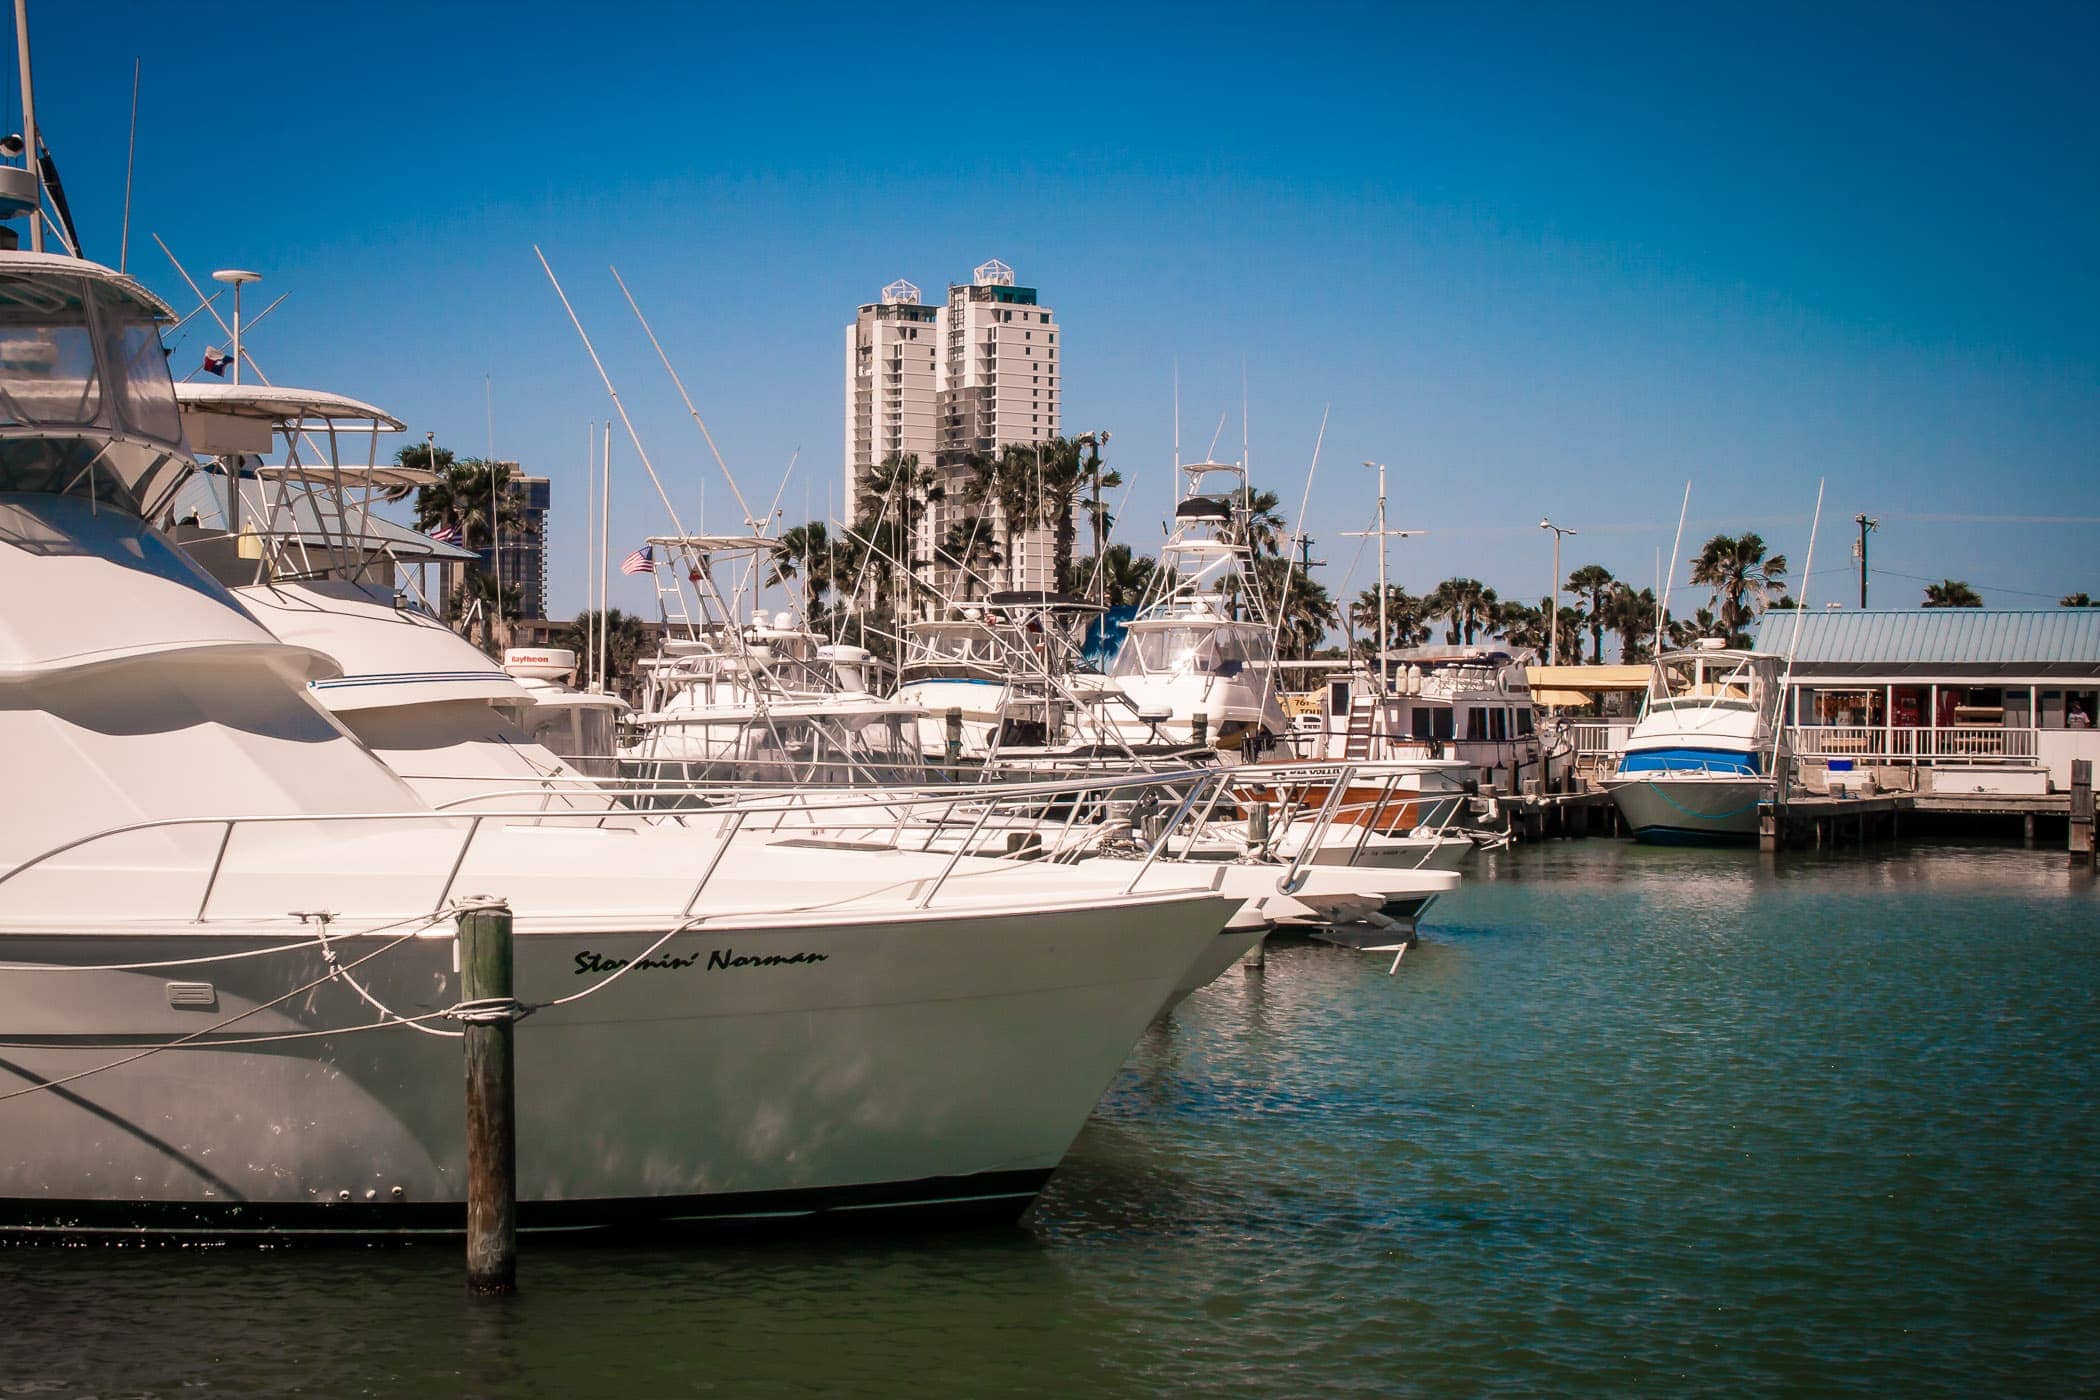 Boats docked in South Padre Island, Texas.